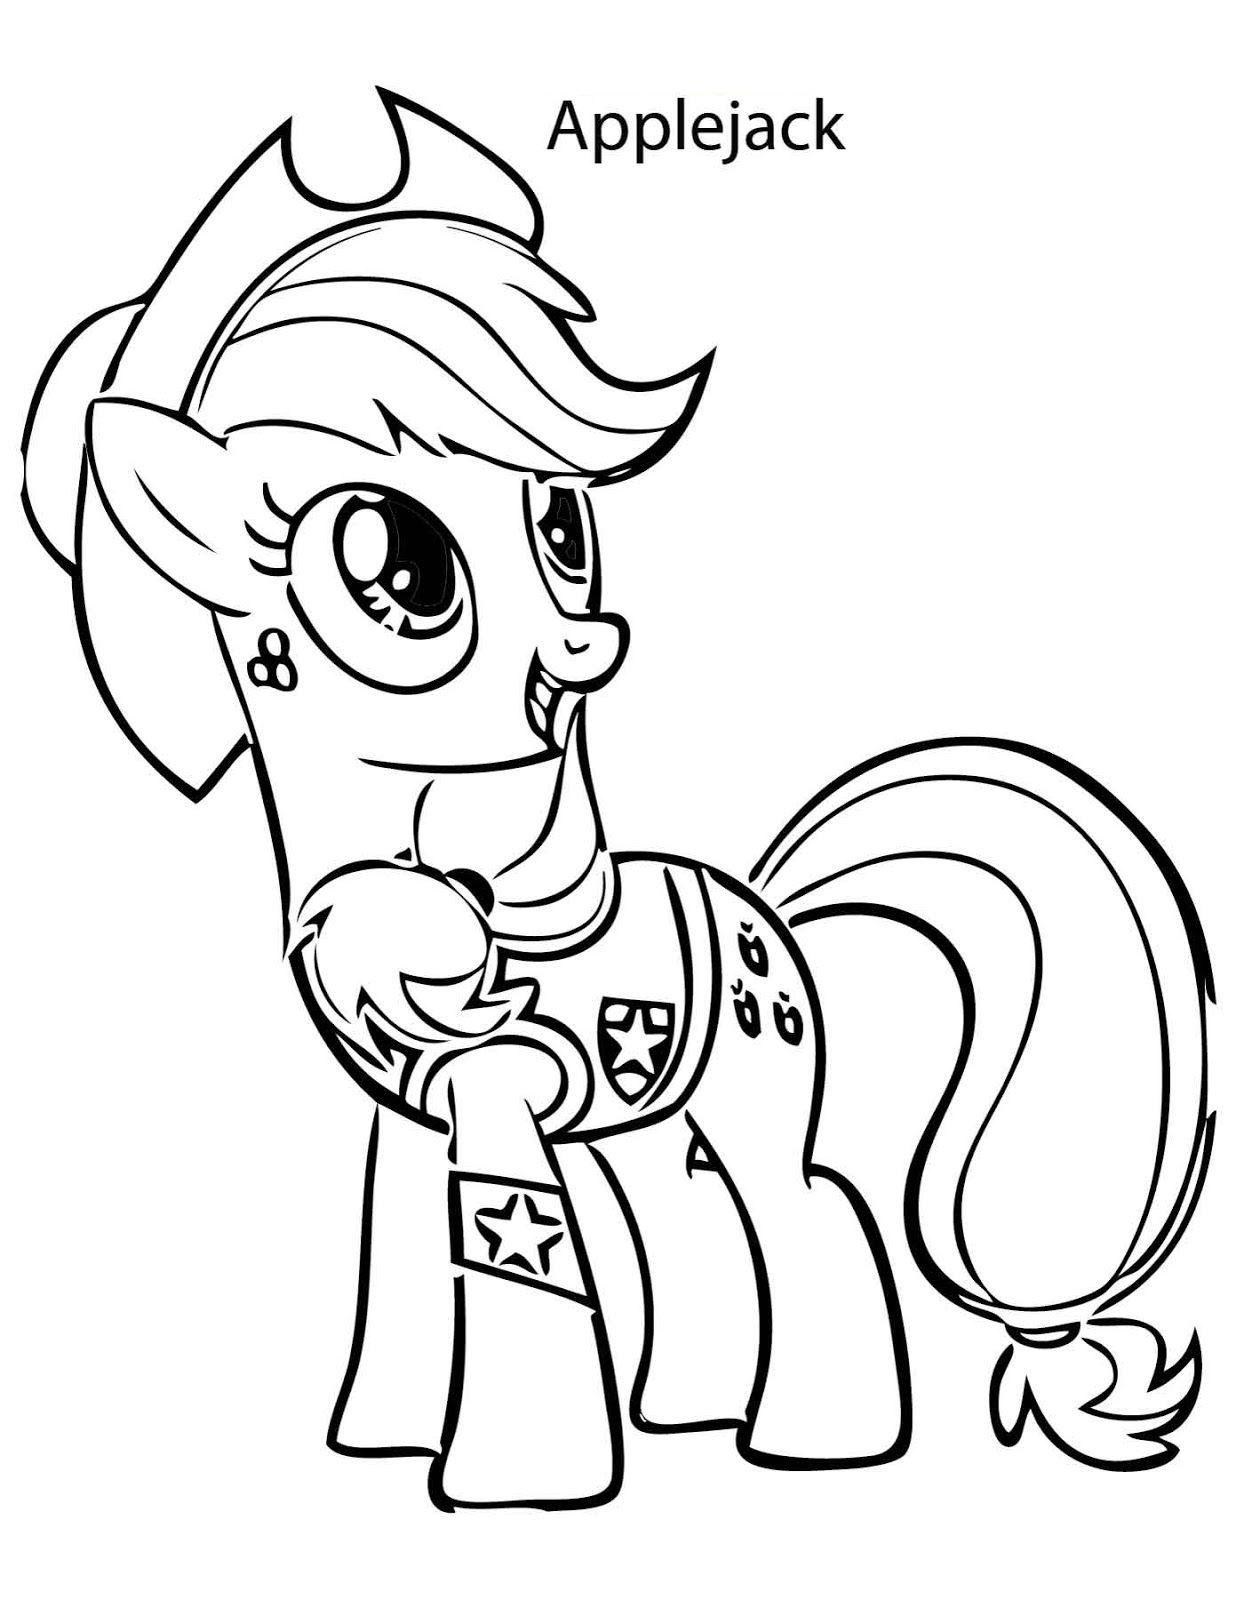 Applejack Coloring Pages - Best Coloring Pages For Kids